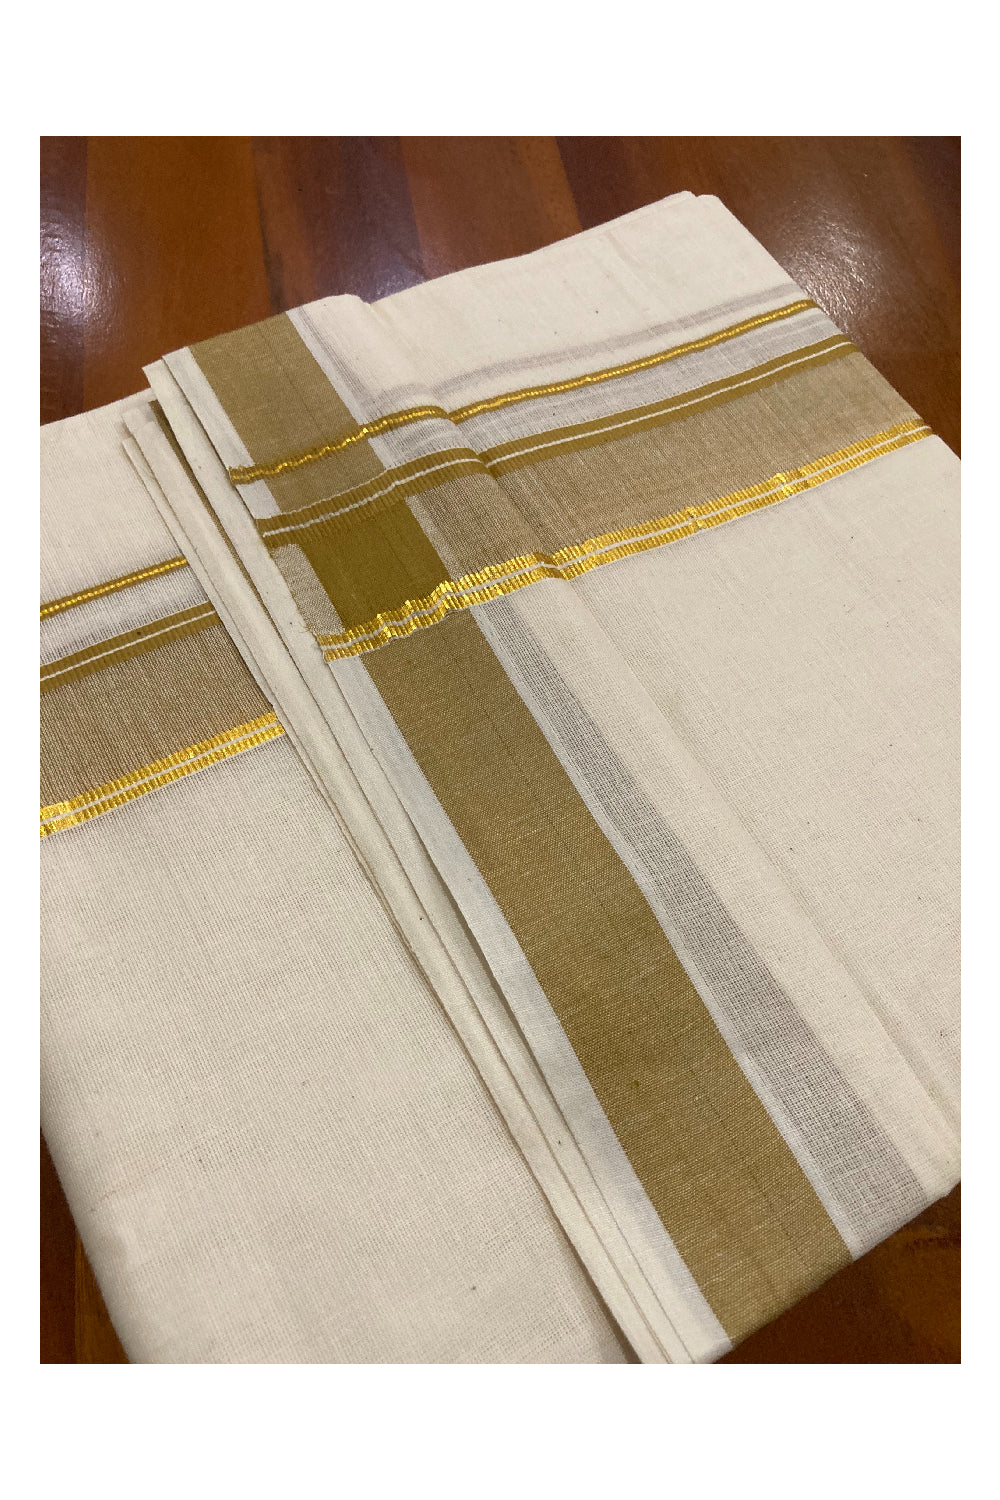 Pure Cotton Double Mundu with Light Brown and Kasavu Border (South Indian Dhoti)